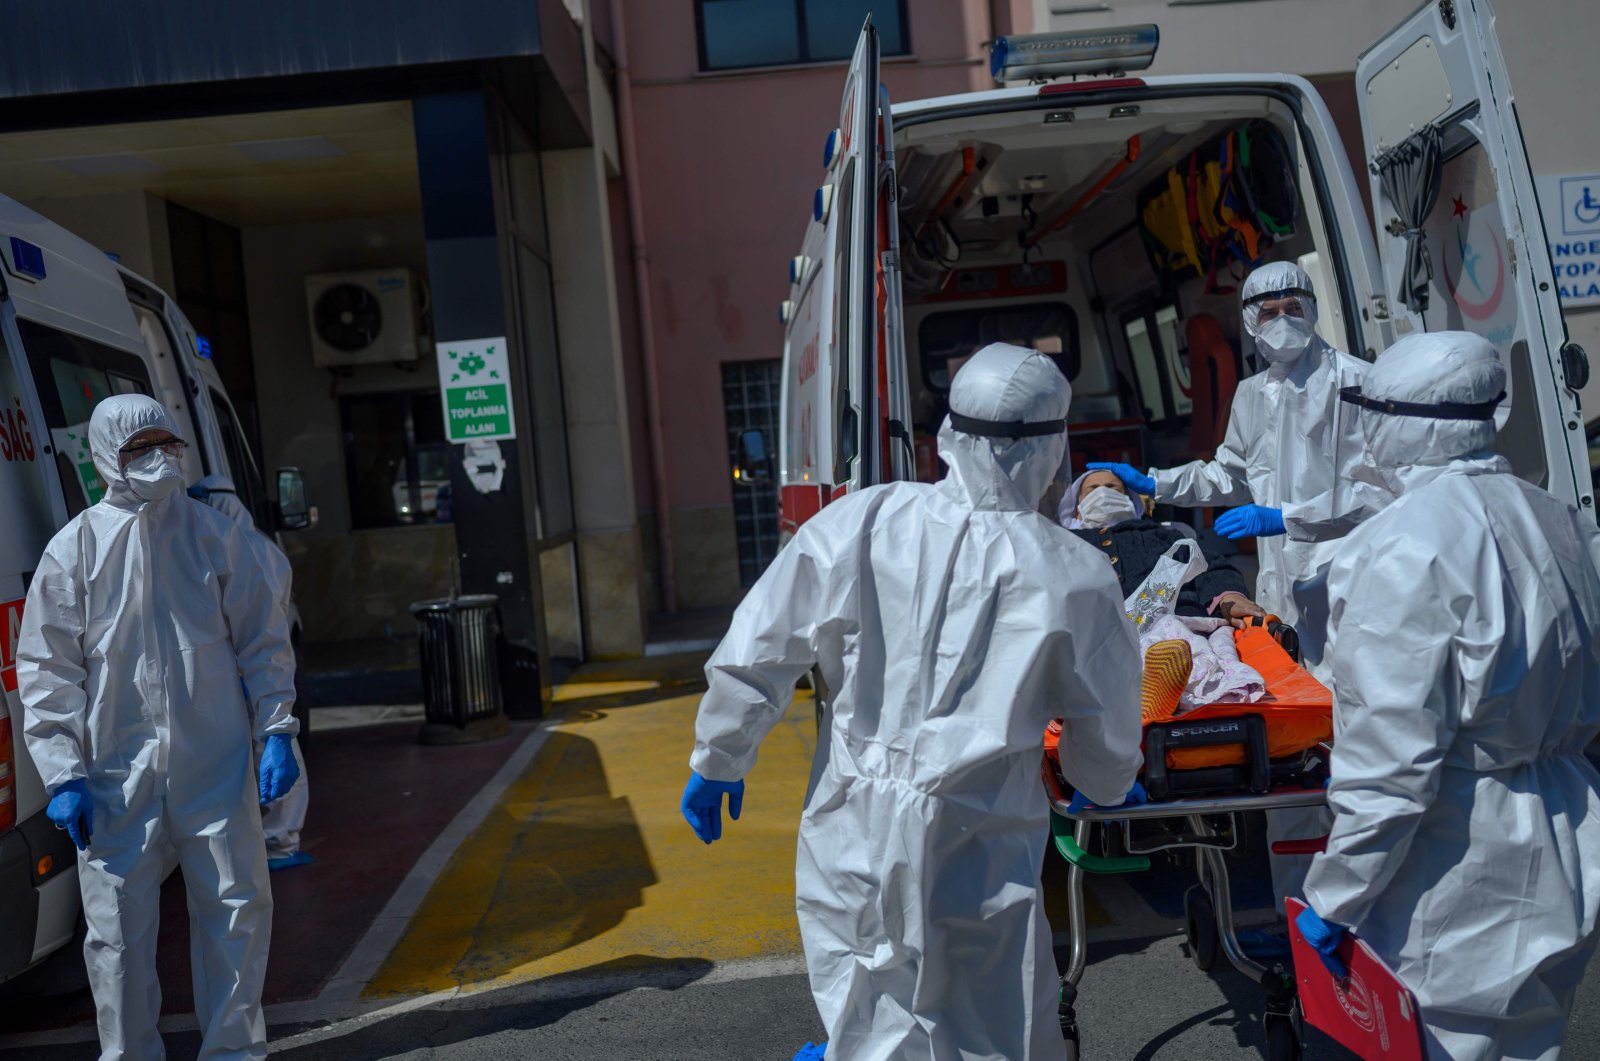 Health workers transport a patient suspected of being infected by the coronavirus in front of Bağcılar public hospital in Istanbul, Turkey, April 28, 2020. (AFP Photo)